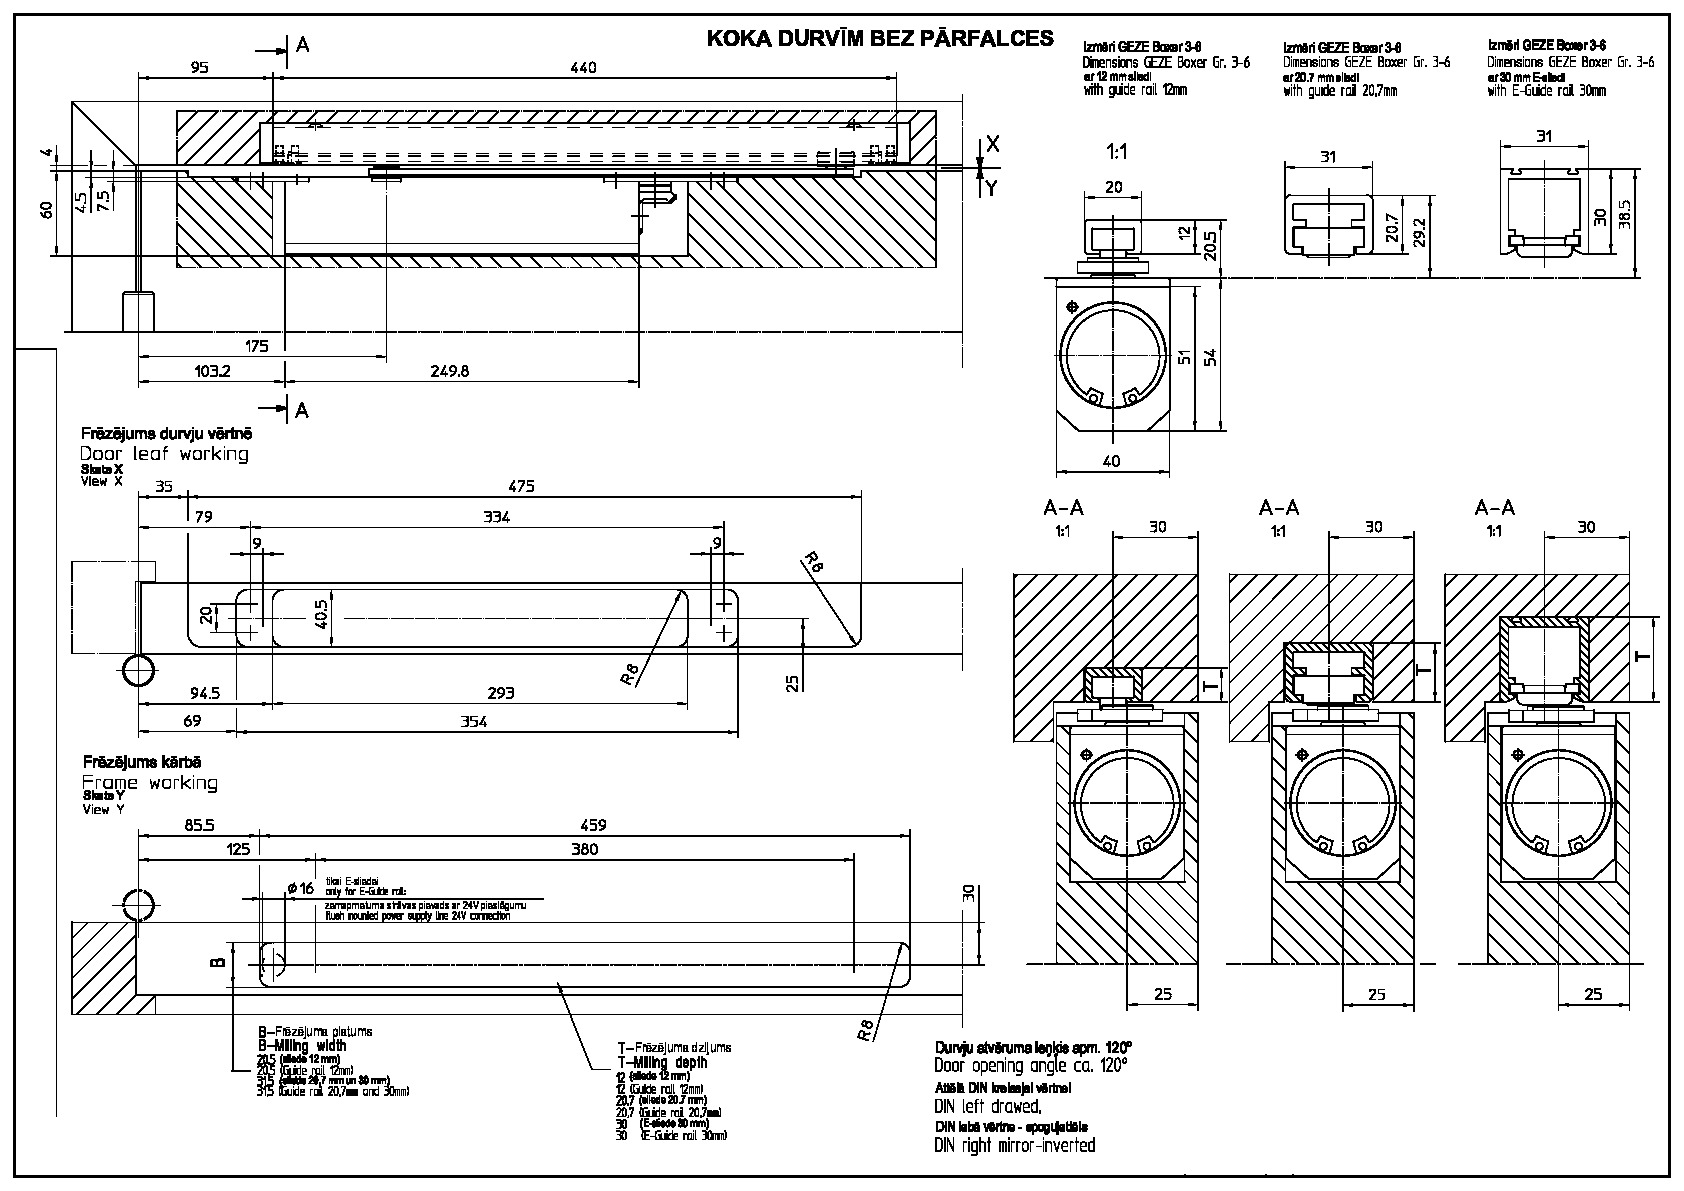 Assembly details for the concealed closer BOXER 3-6 in non-rebated doors